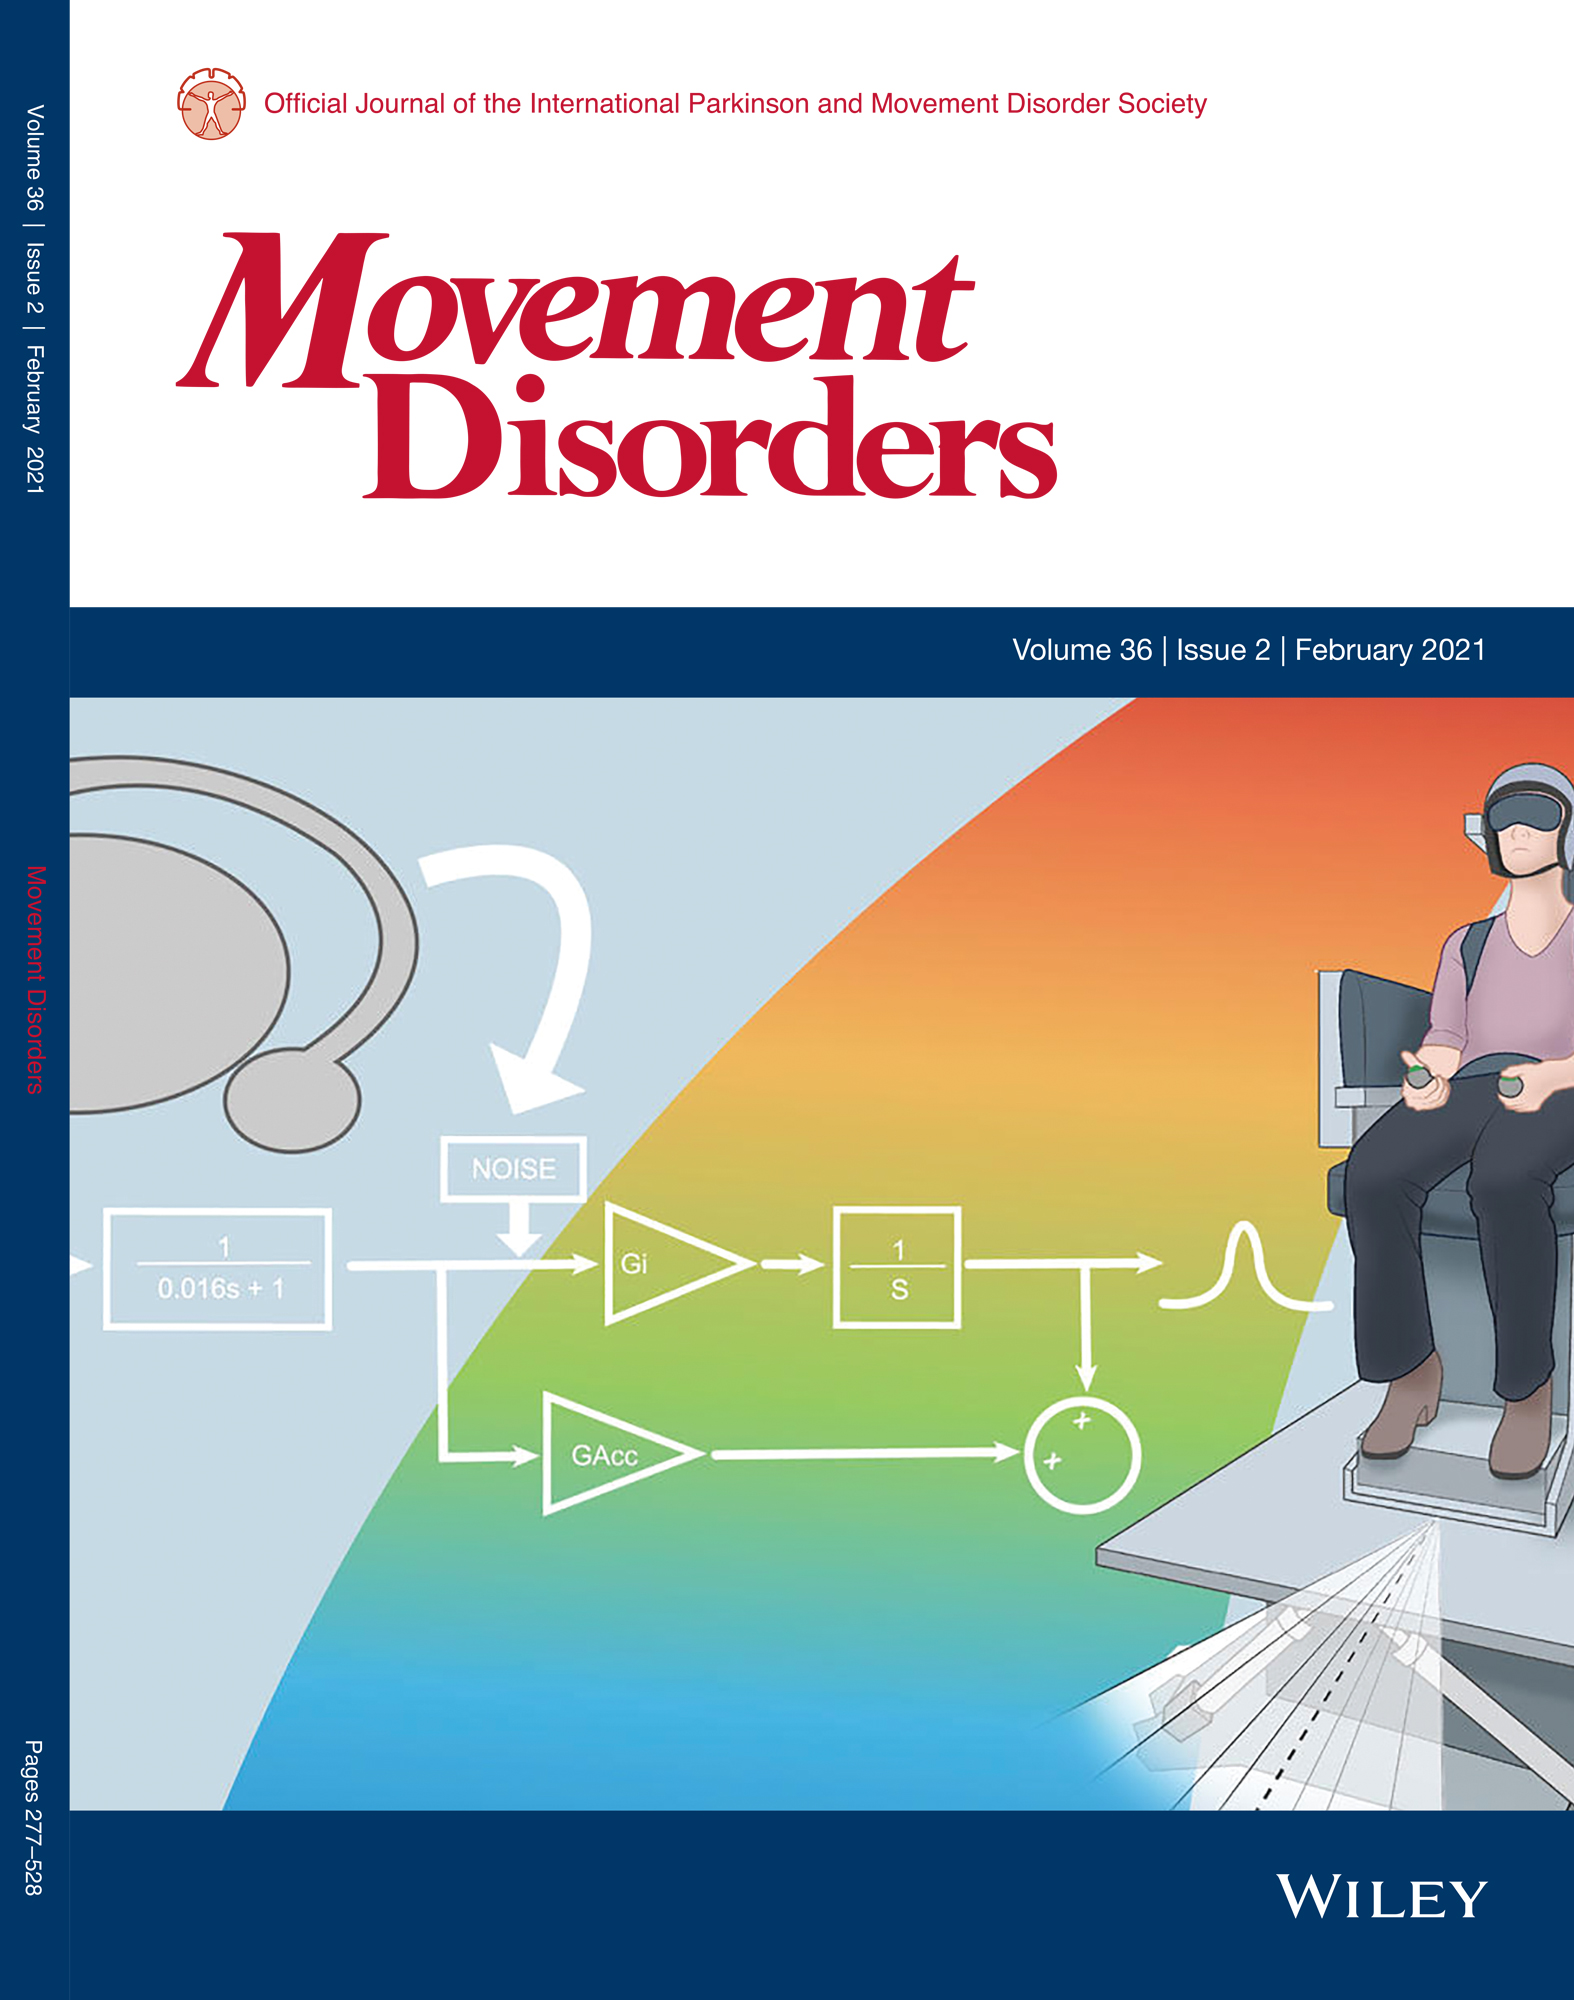 February 2021 cover of Movement Disorders, the official journal of the